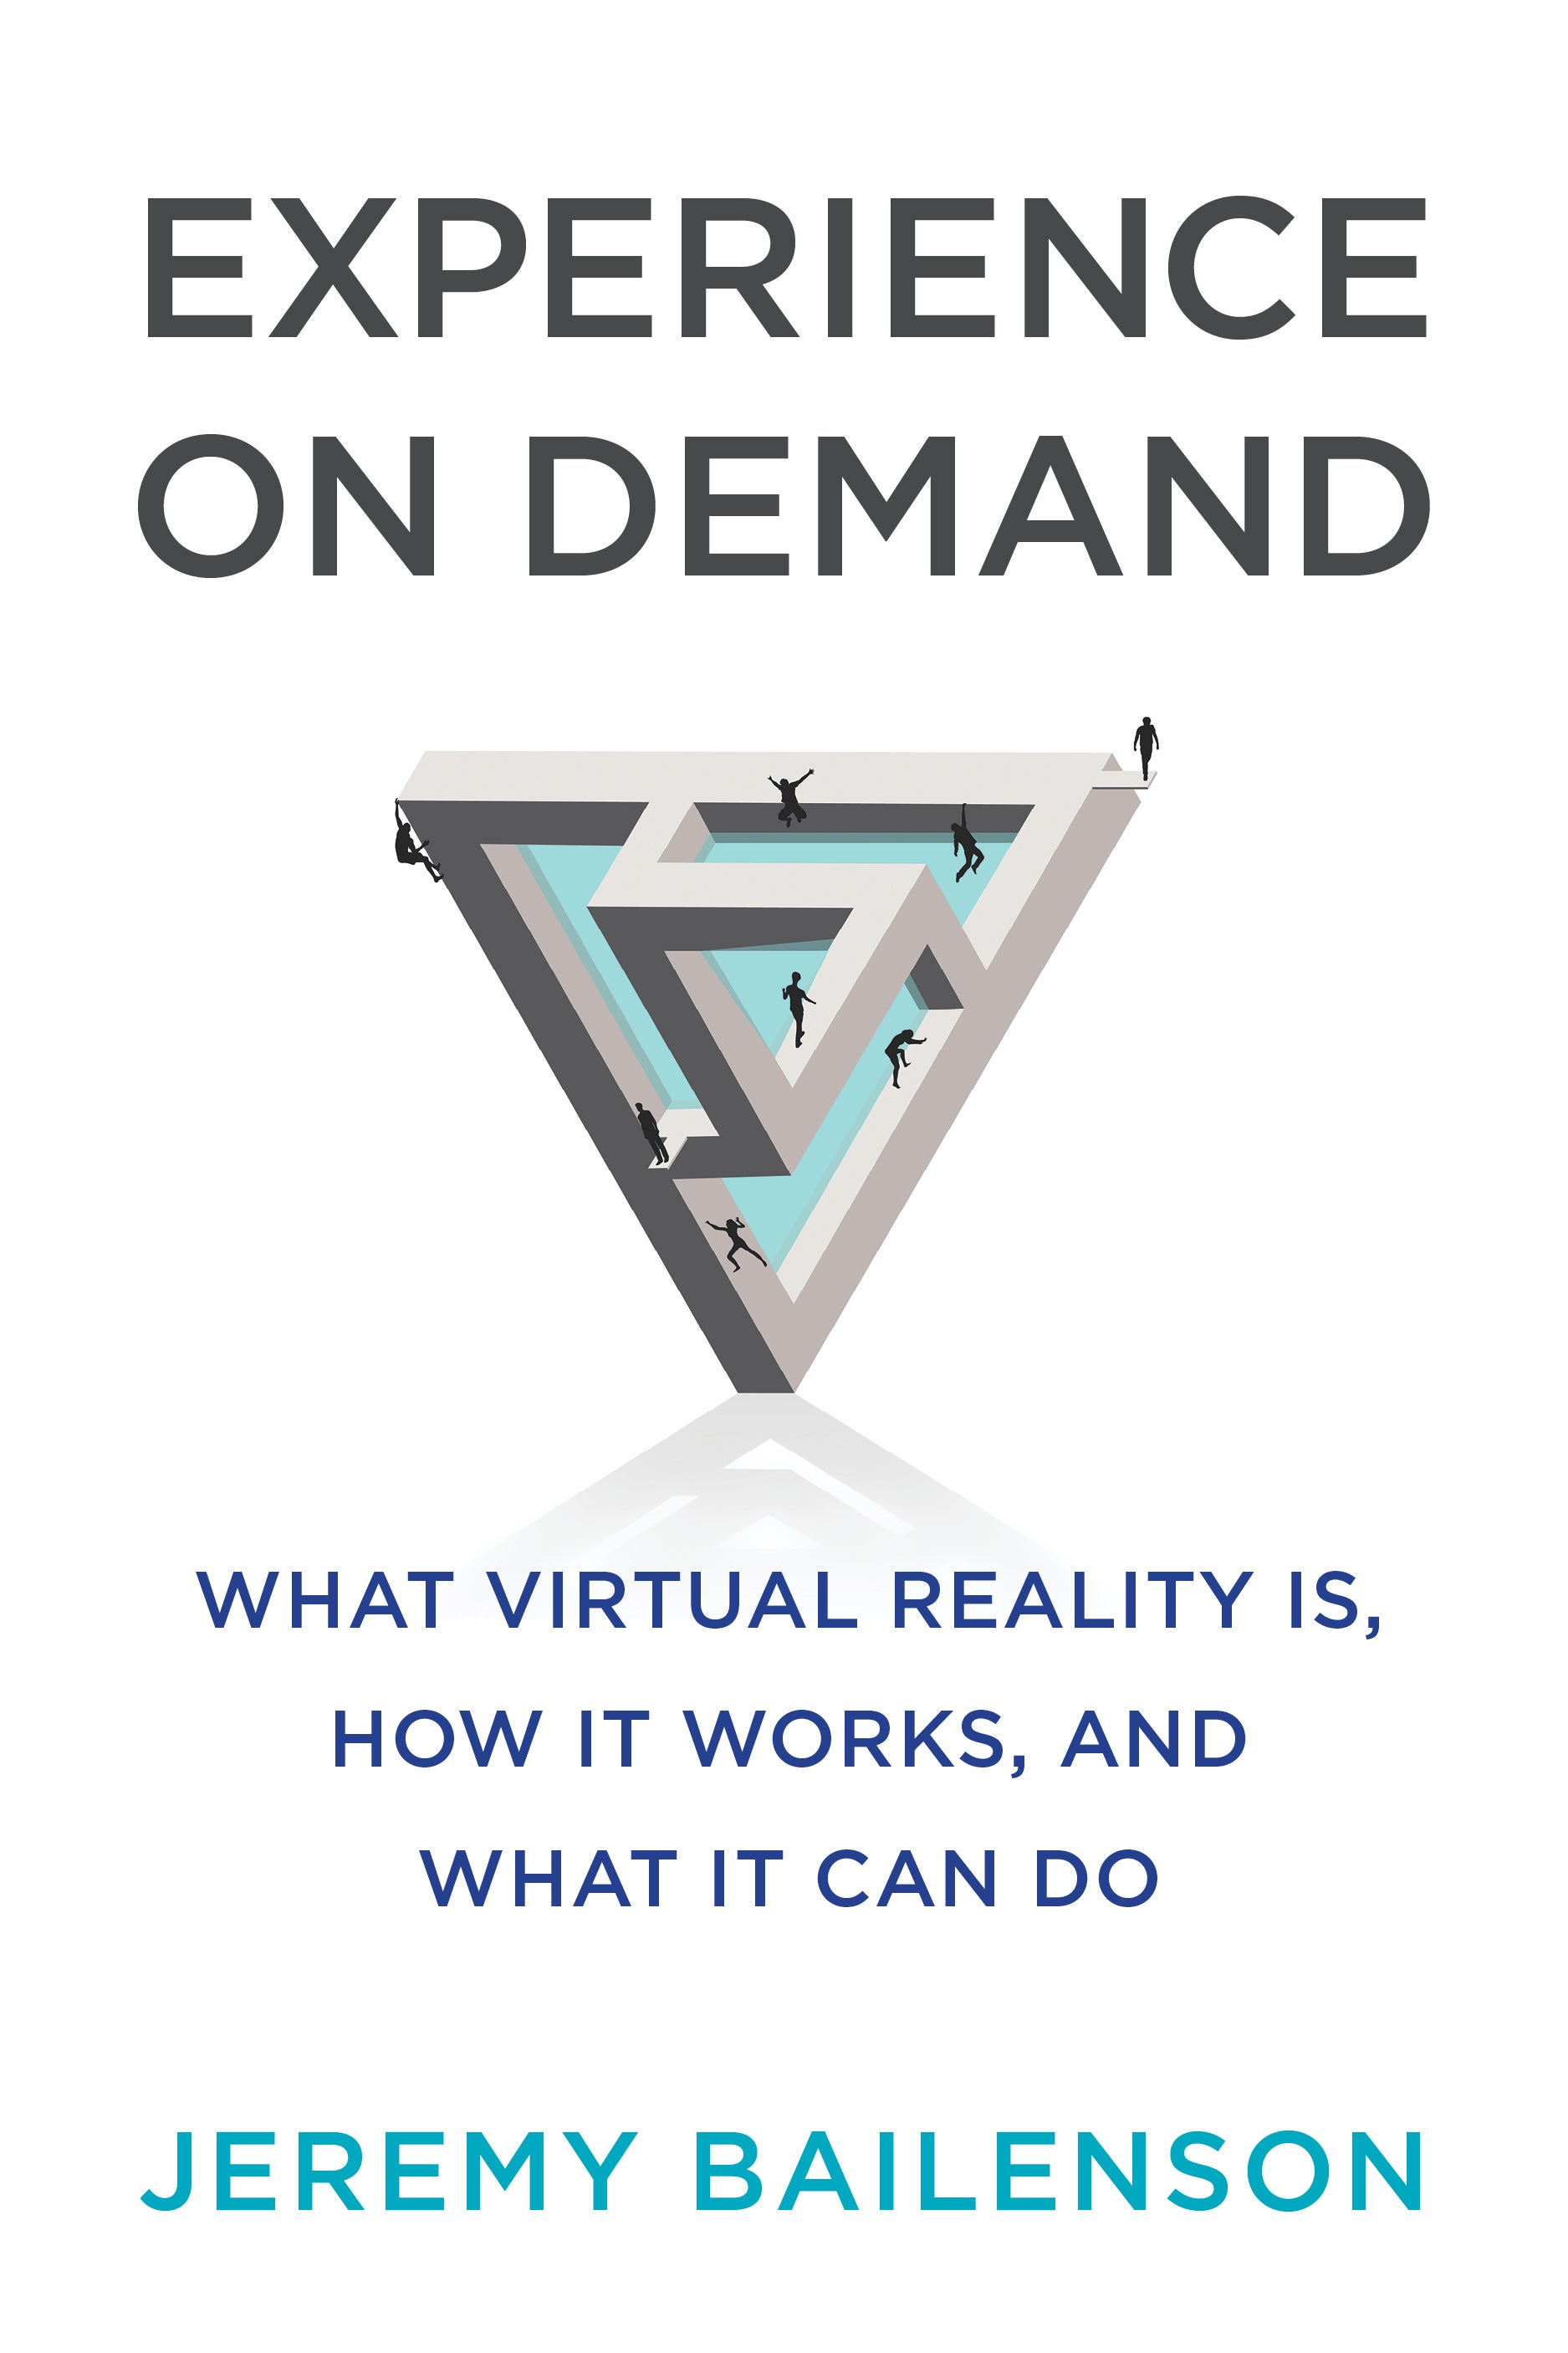 Experience on Demand: What Virtual Reality Is, How It Works, and What It Can Do.